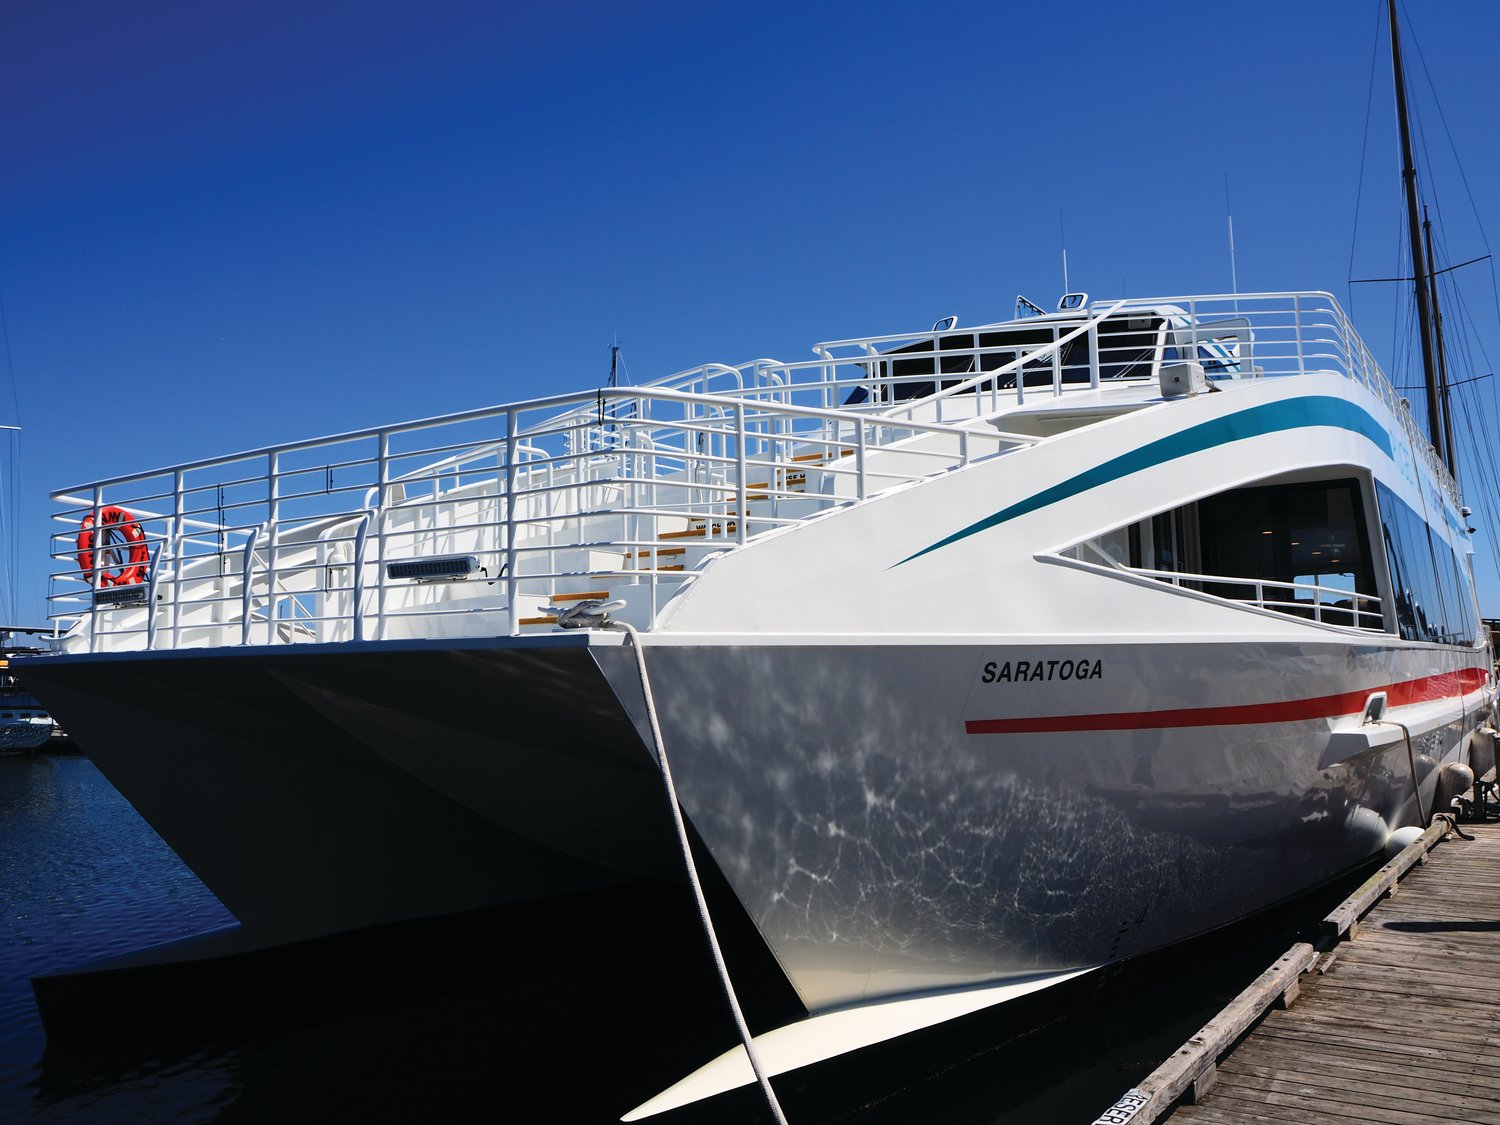 The Saratoga is the first boat that Puget Sound Express has had the opportunity to build, and was designed with customers, whales, and the environment in mind.